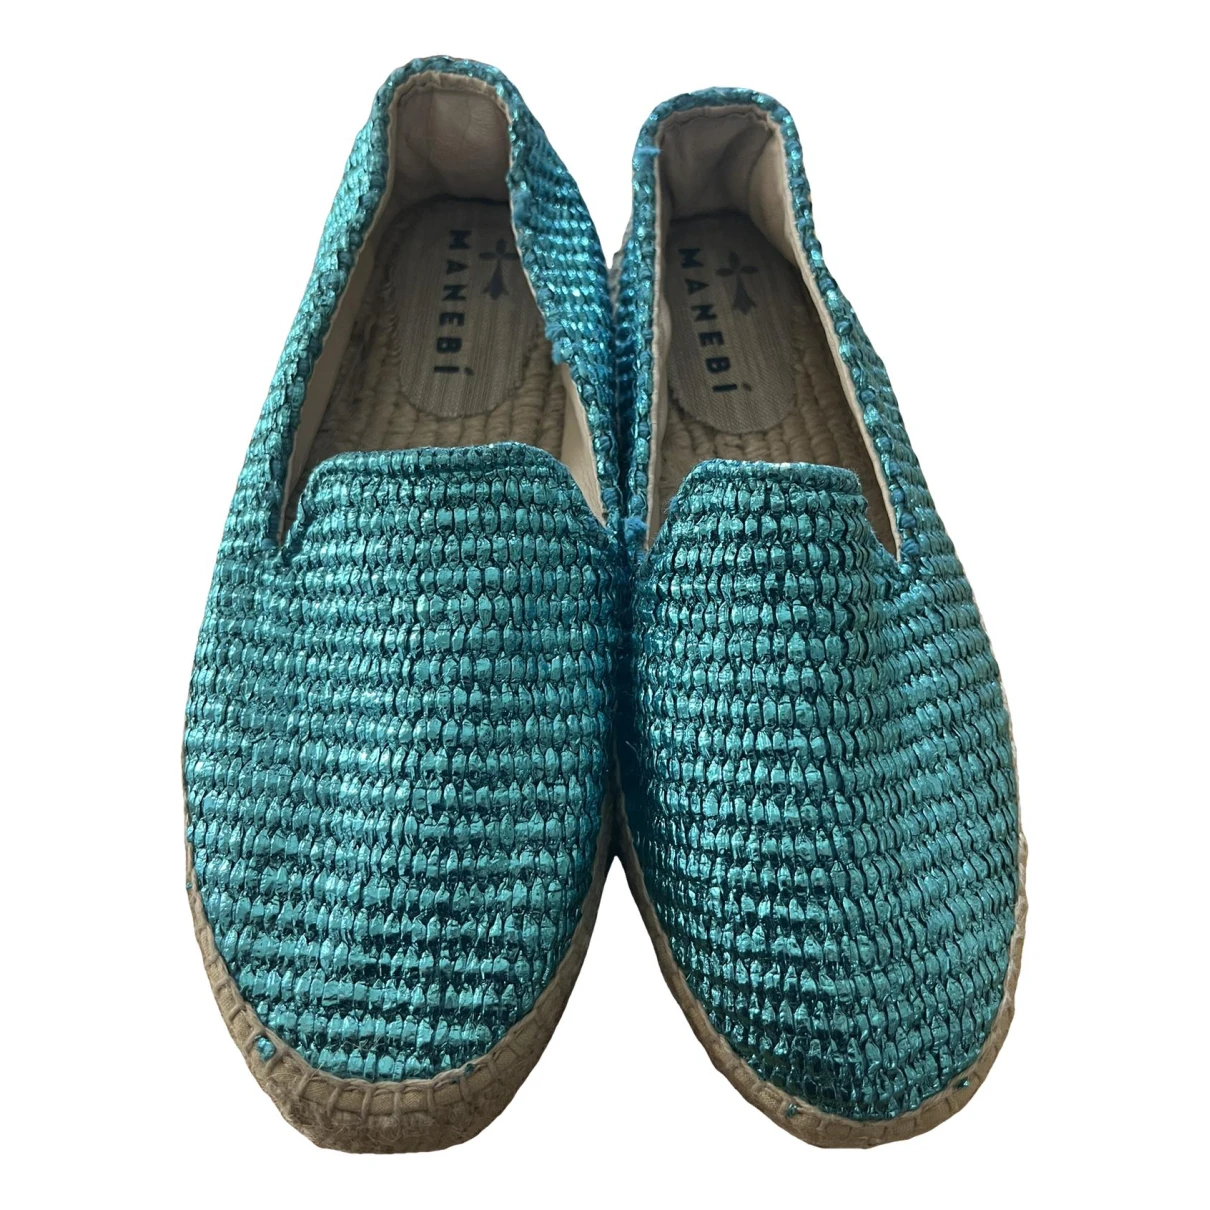 shoes Manebi espadrilles for Female Synthetic 38 EU. Used condition